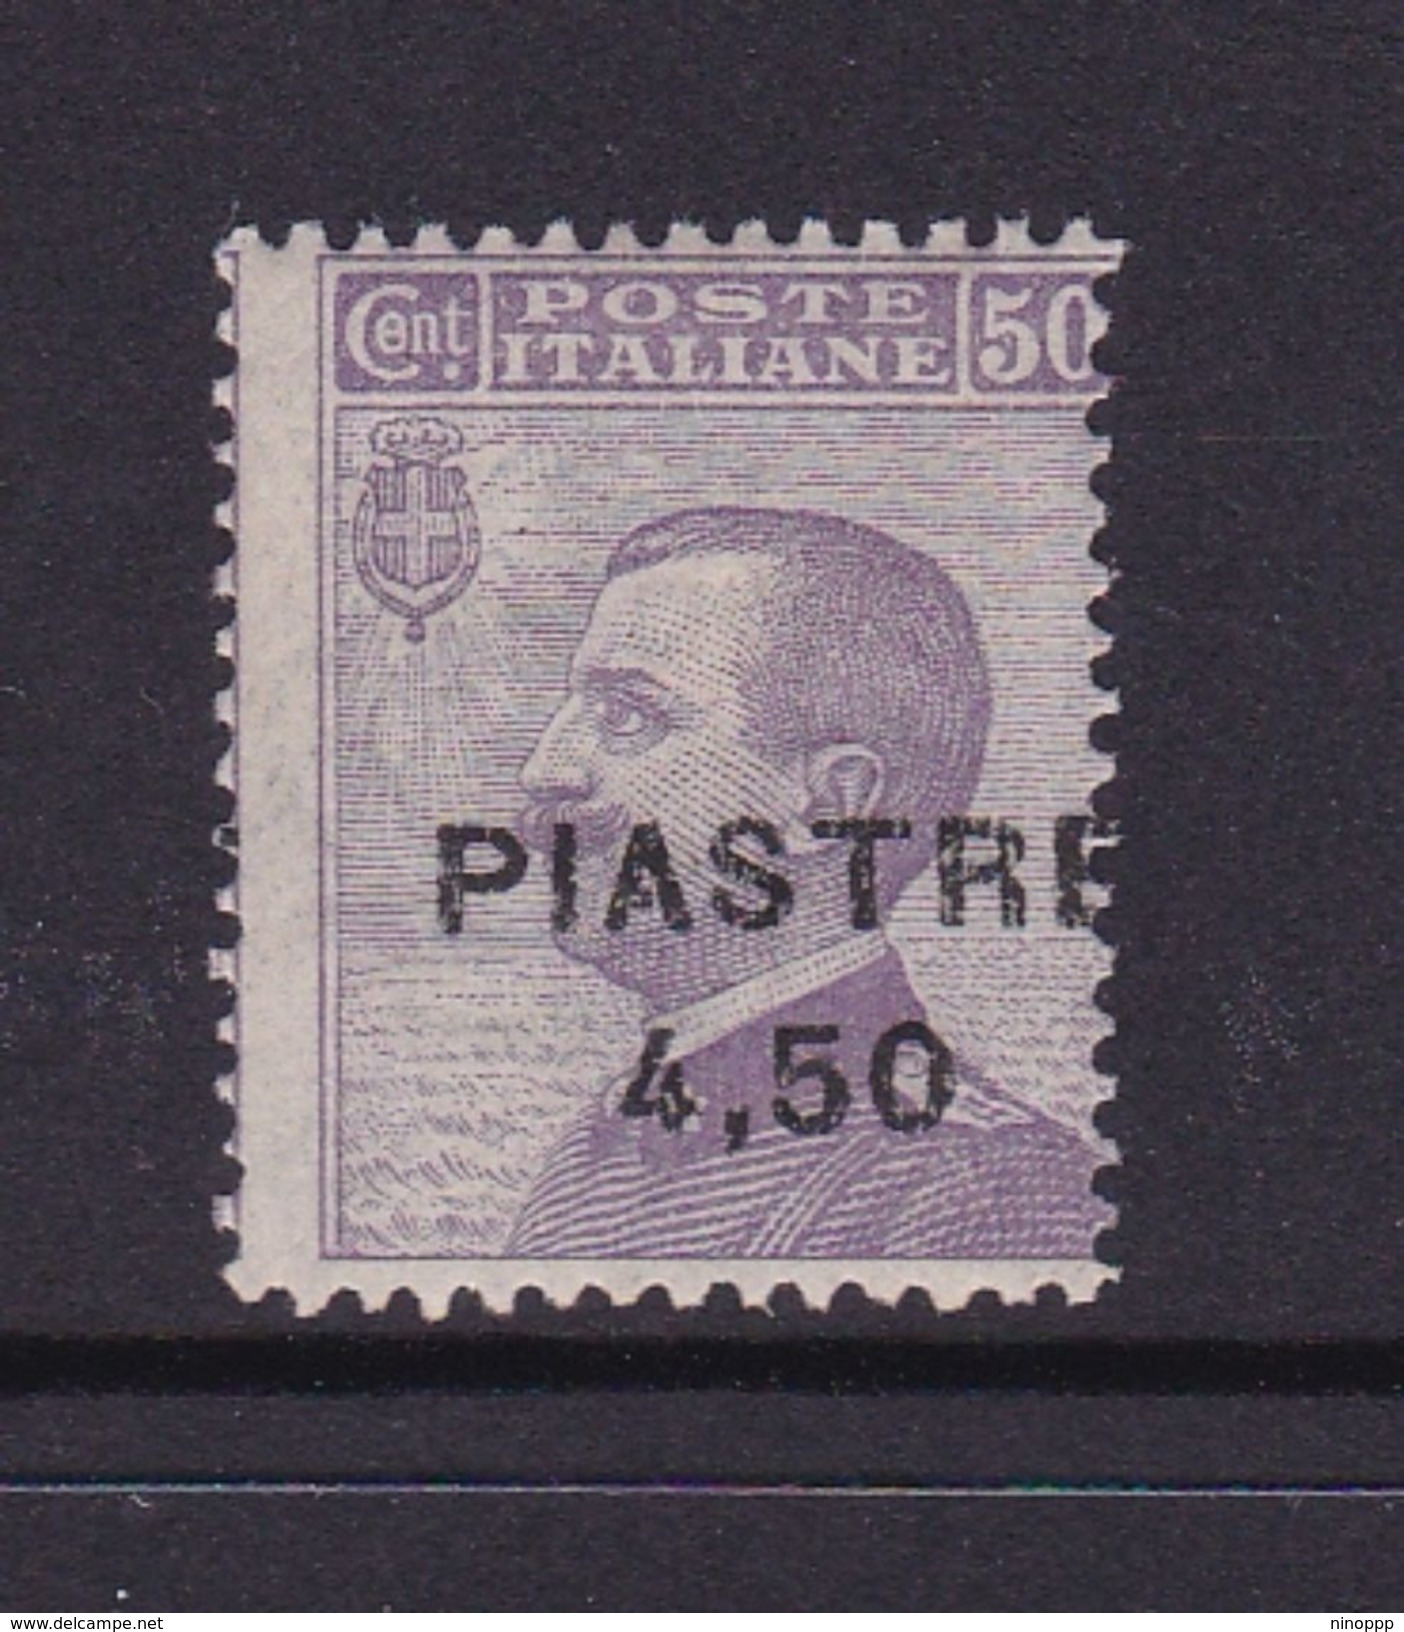 Italy-Italian Offices Abroad-European And Asia Offices-Constantinople S52 1922 4,50 Piastre On 50c Violet MH - Europa- Und Asienämter